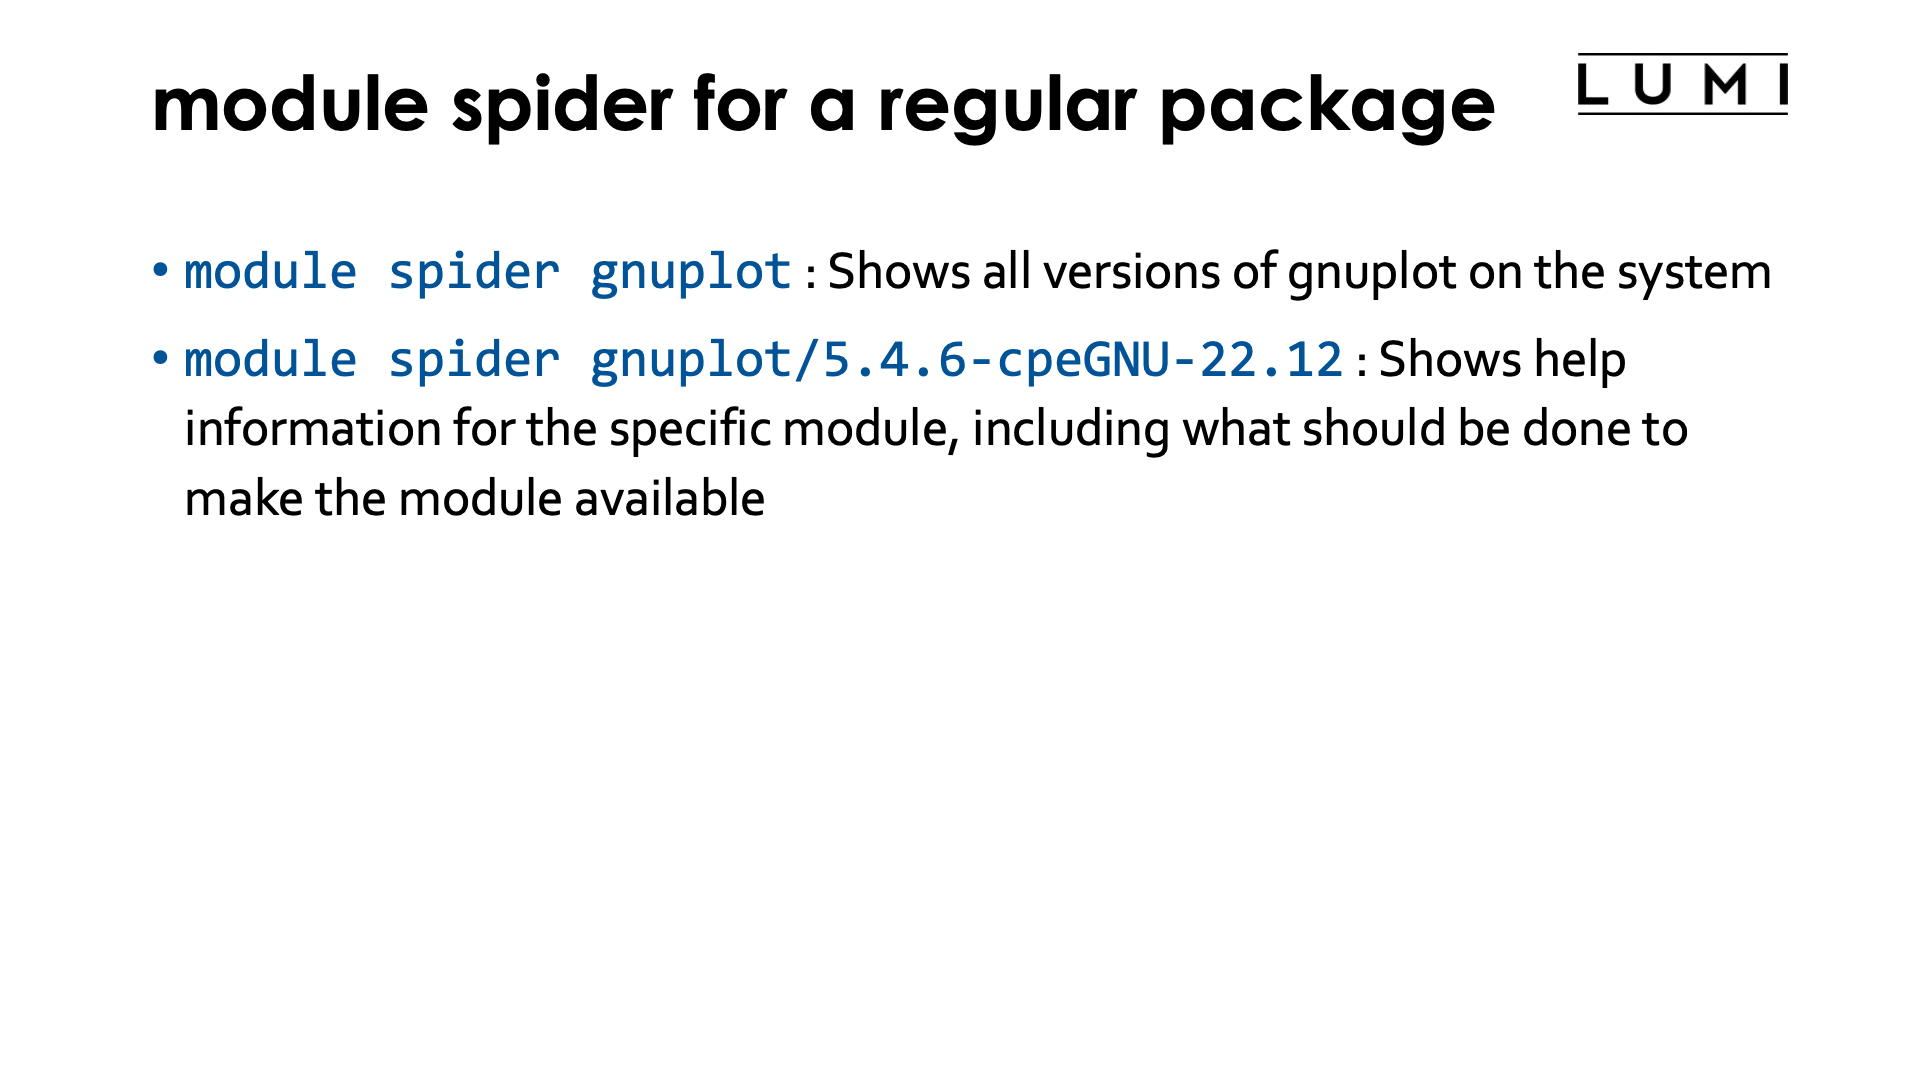 module spider for a regular package